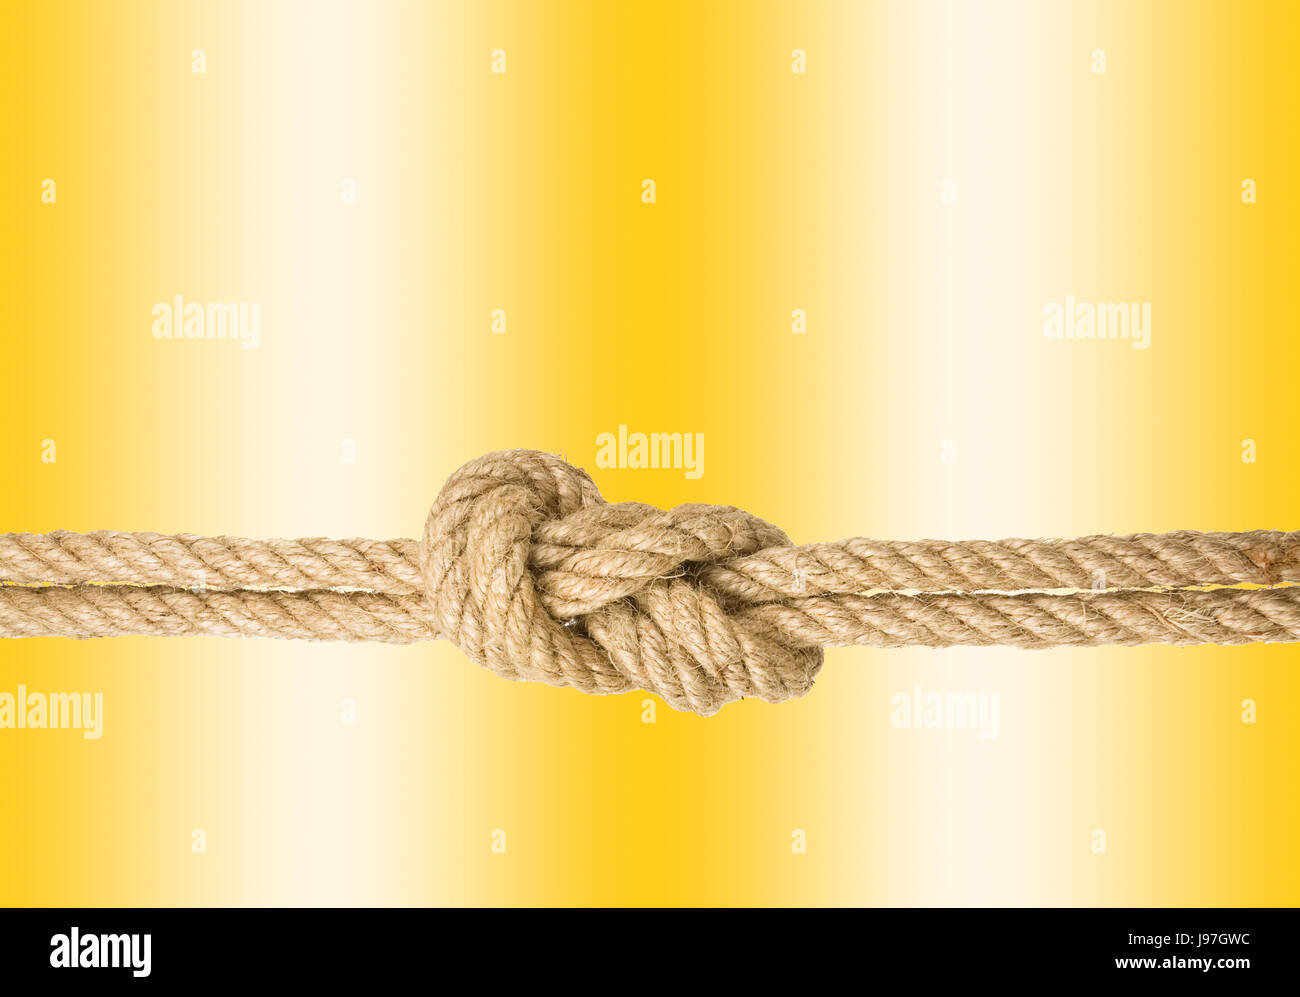 Strong rope with a knot, isolated against the golden colored background Stock Photo